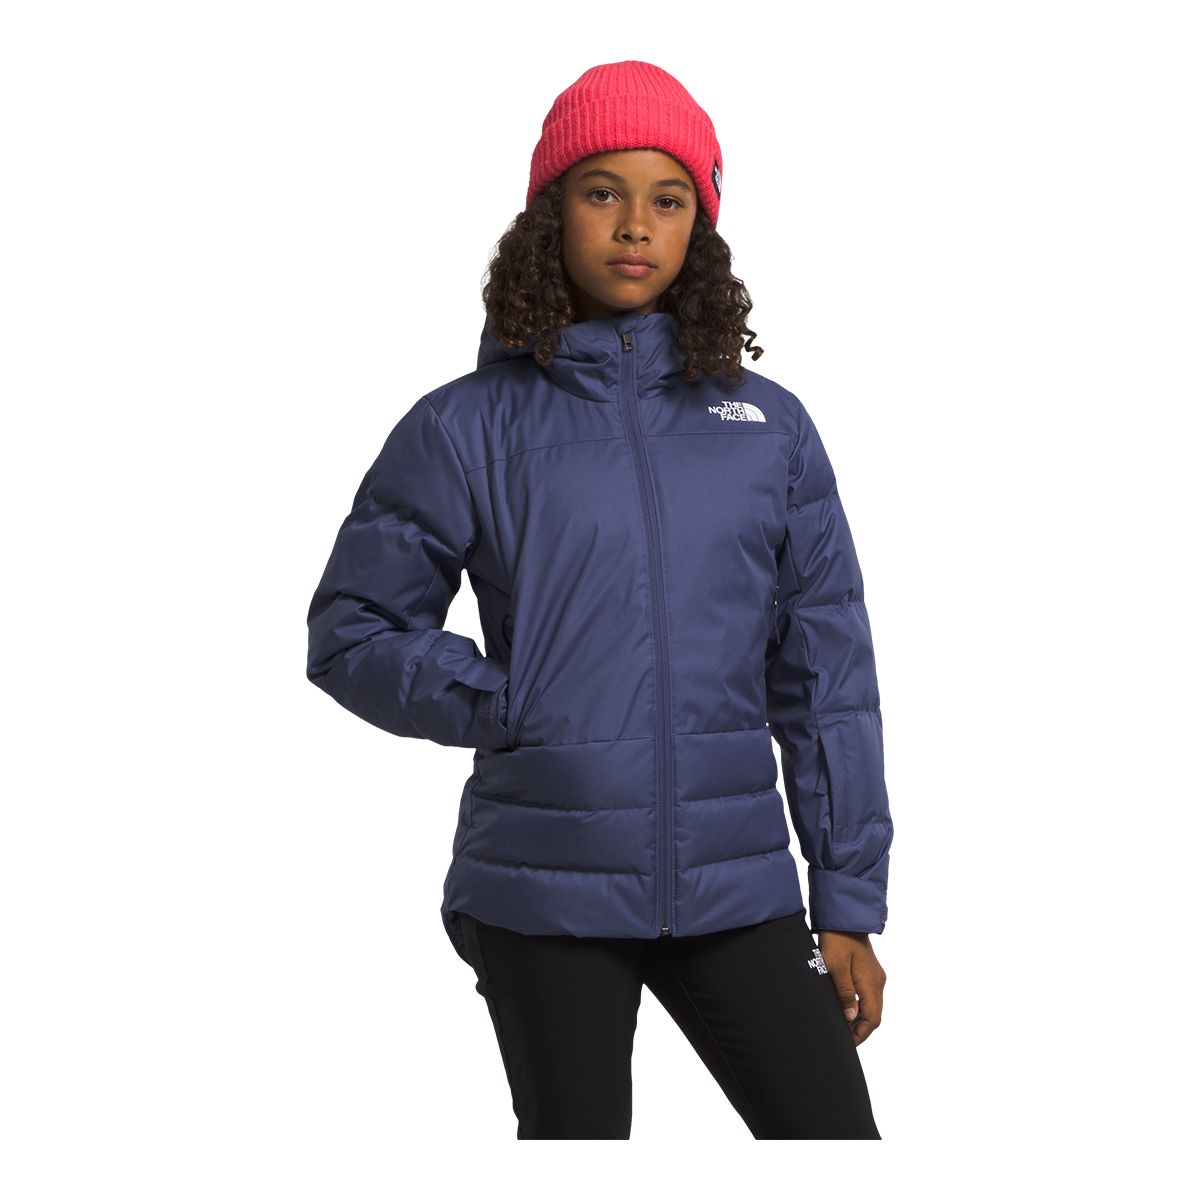 Image of The North Face Girls' Pallie Down Jacket